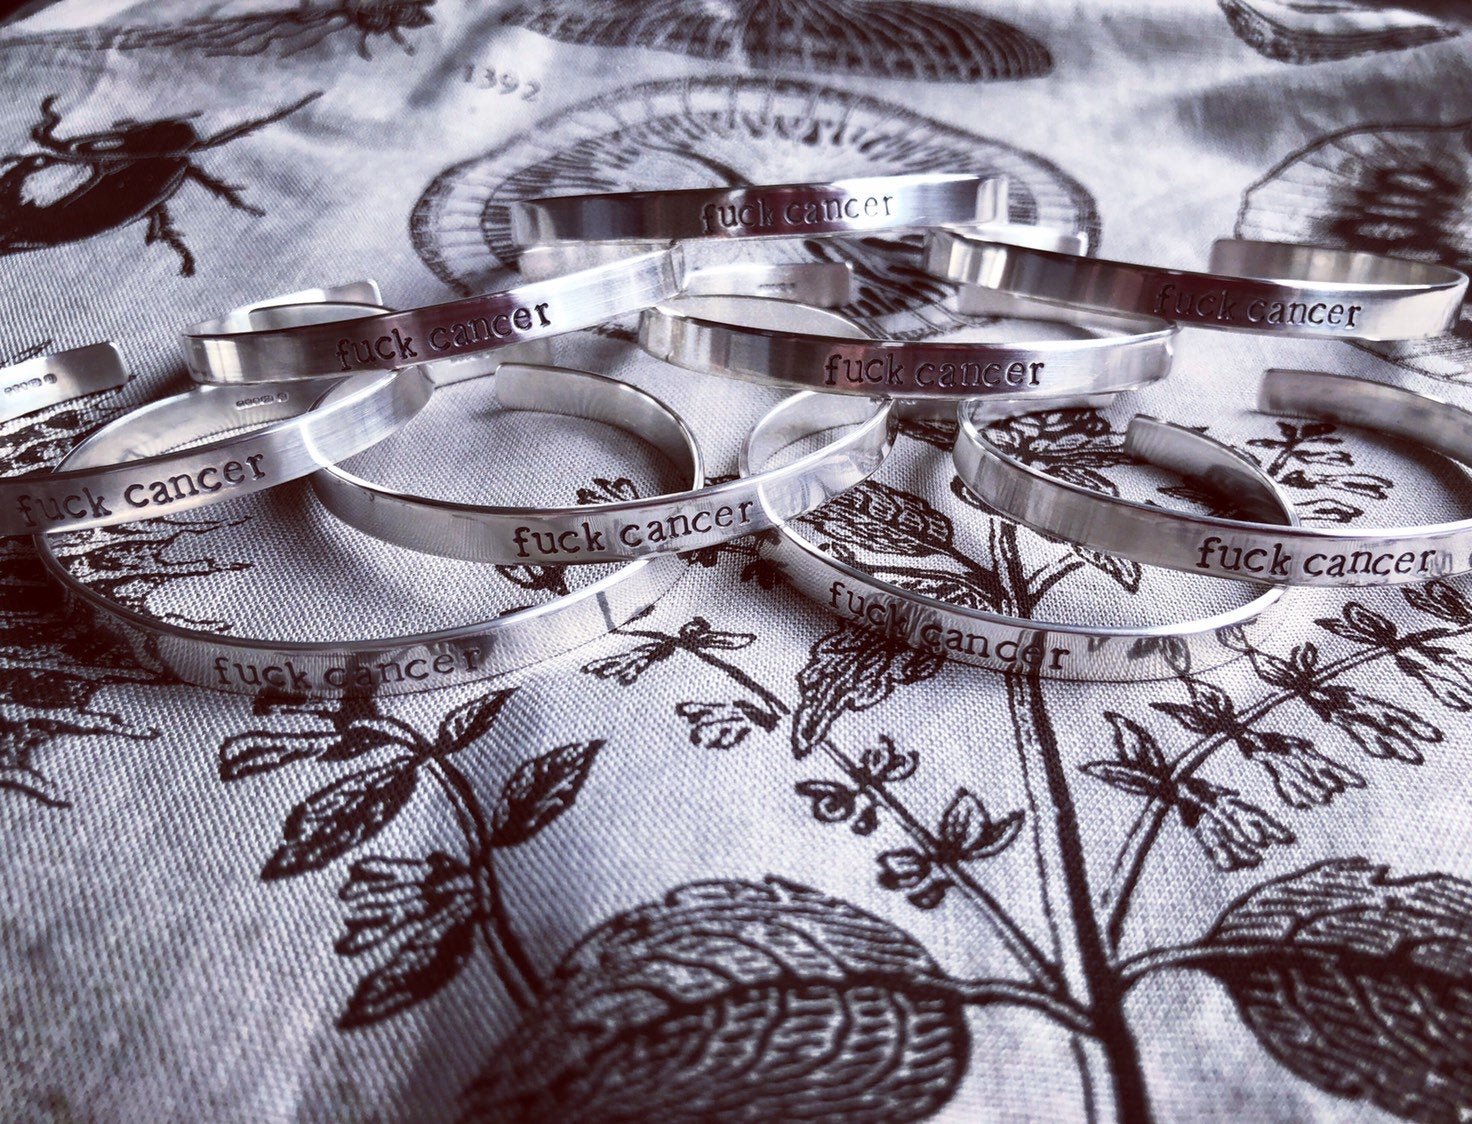 Image of Sterling silver cuff bracelet 'fuck cancer'. Hand stamped silver cuff F*ck cancer 925.